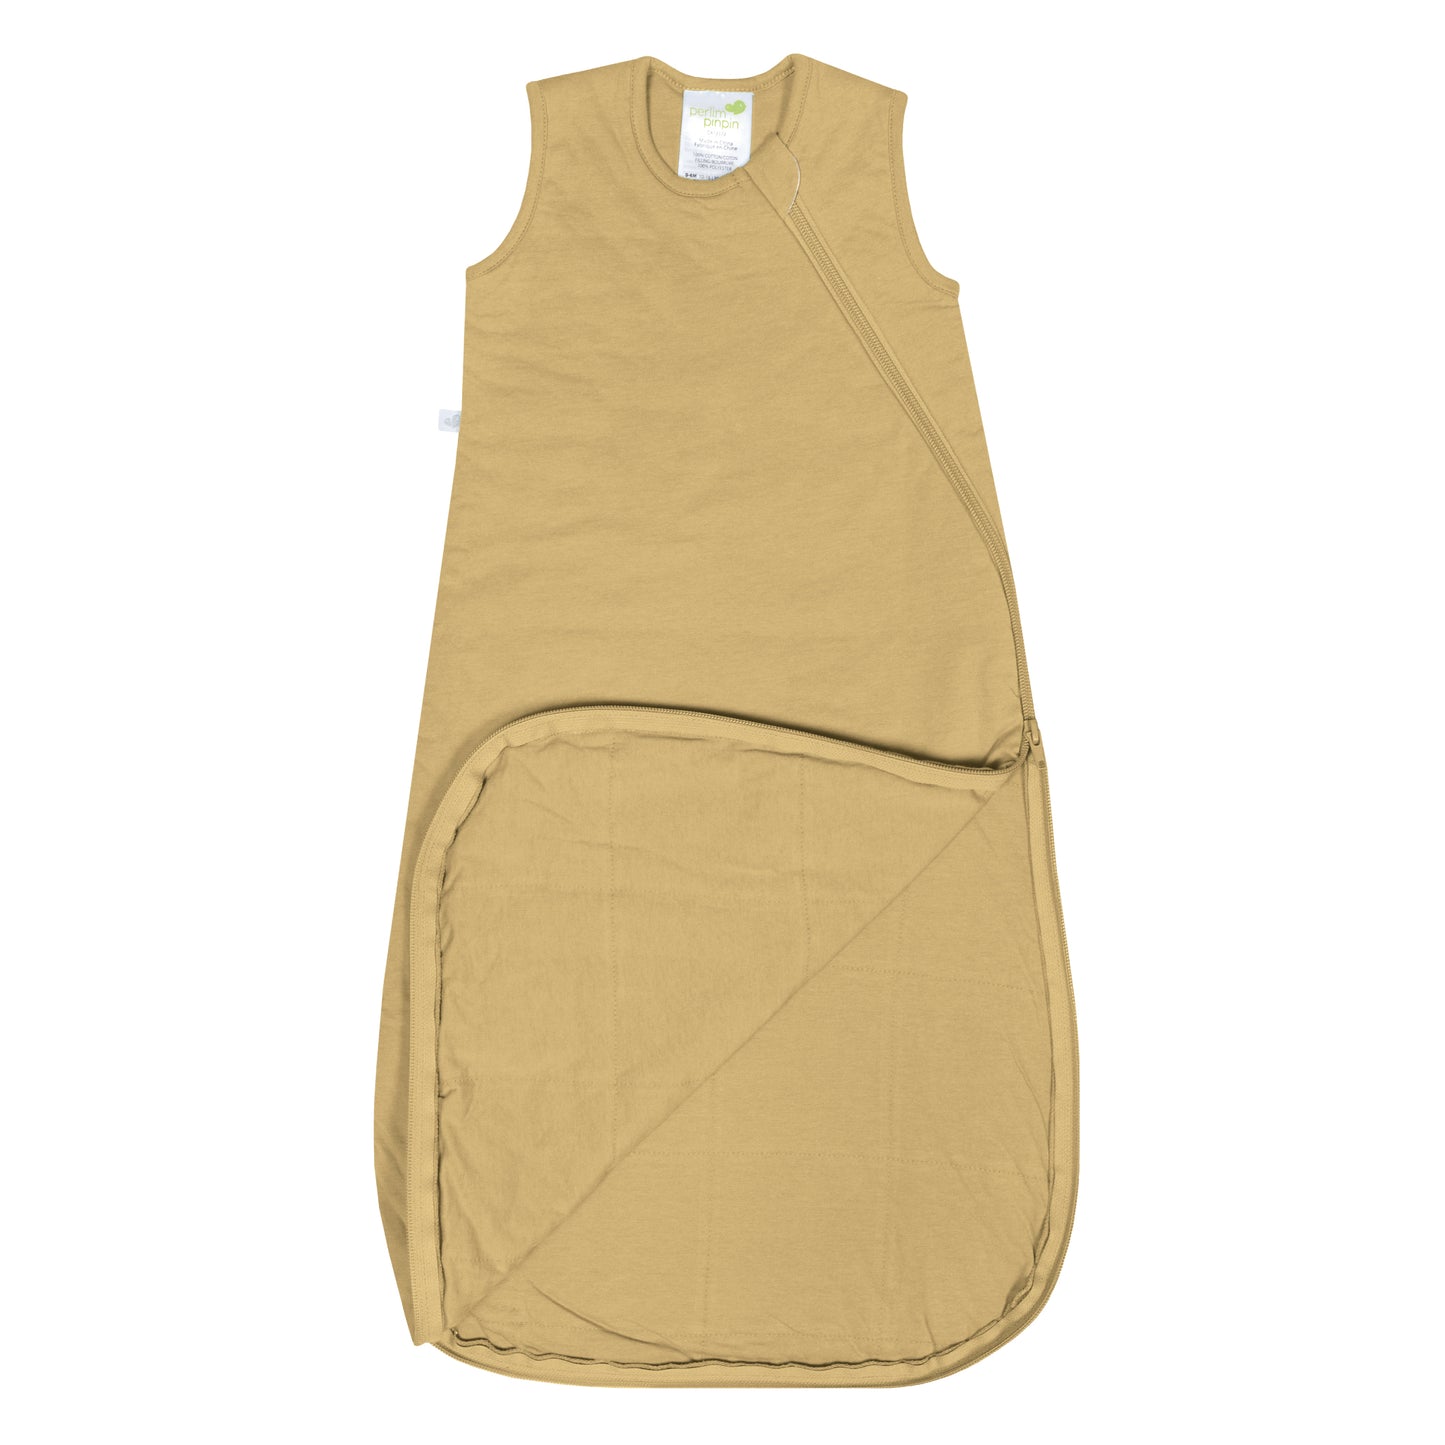 Quilted bamboo sleep sack - Curry (1.0 tog)